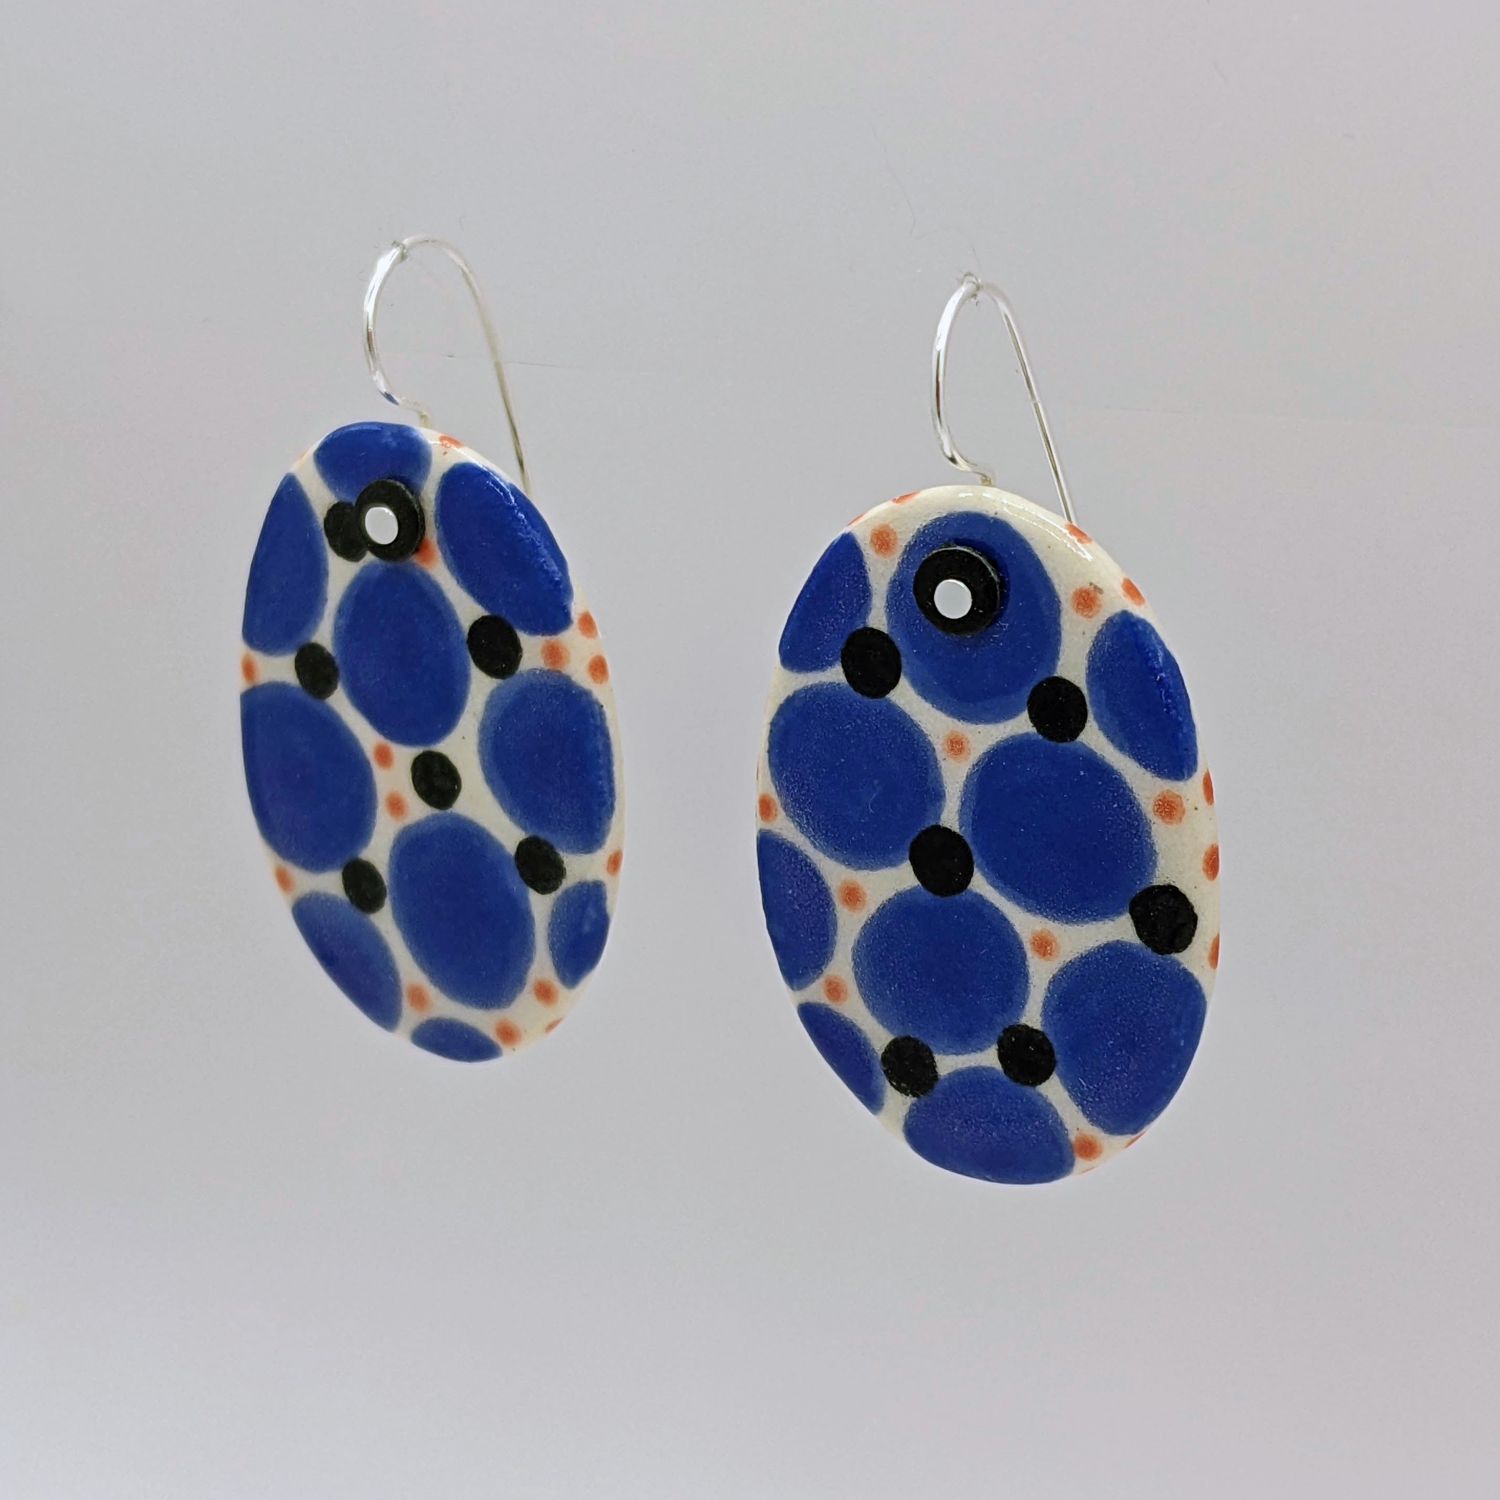 Here and Here: Blue Dotted Ceramic Disc Earrings Product Image 3 of 3